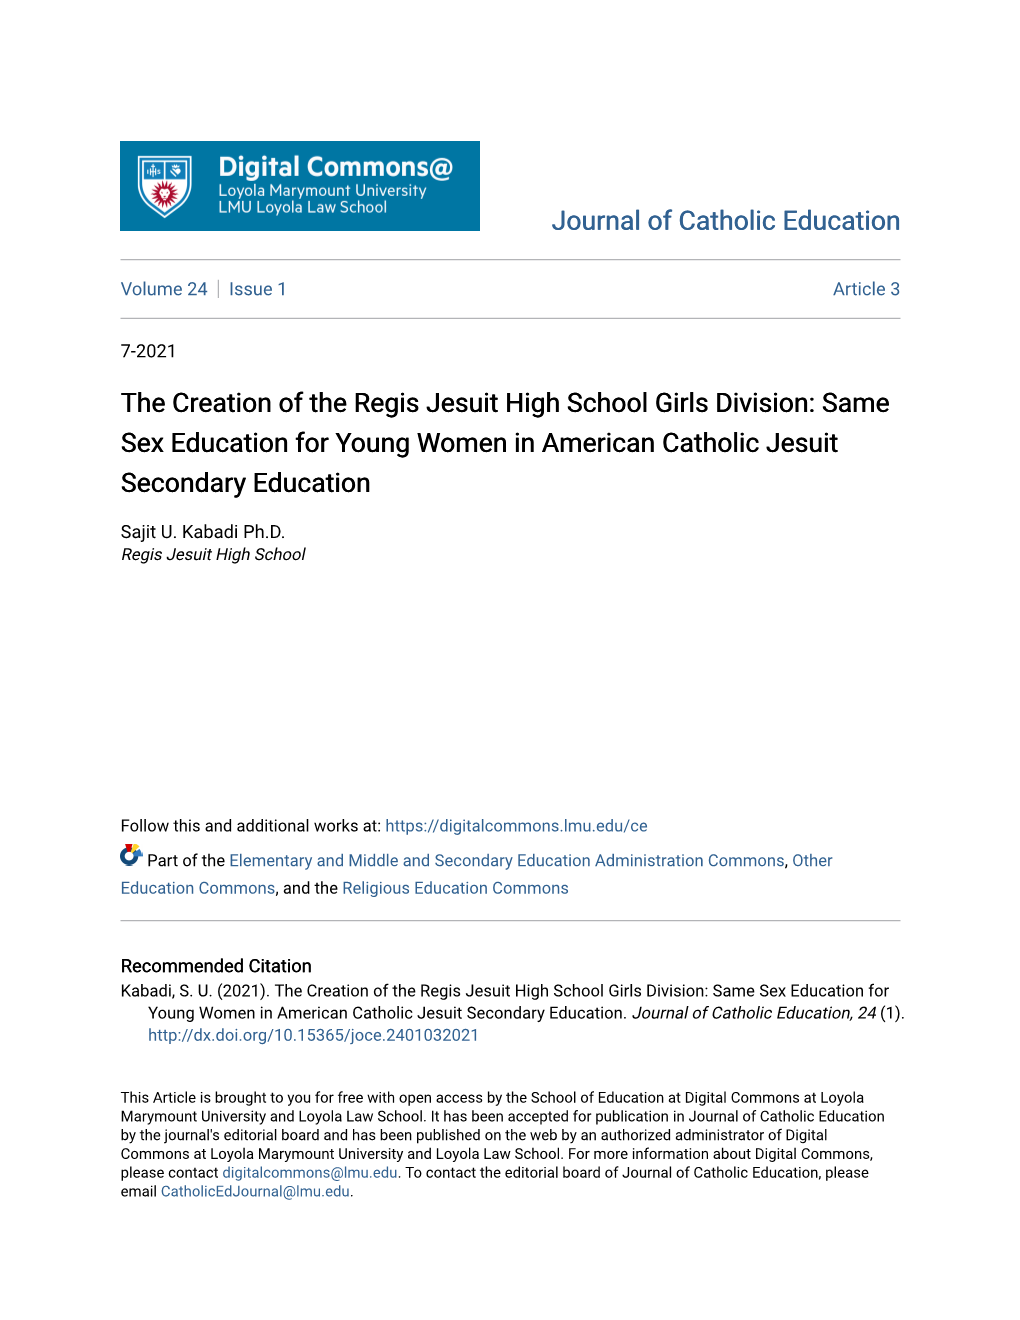 The Creation of the Regis Jesuit High School Girls Division: Same Sex Education for Young Women in American Catholic Jesuit Secondary Education